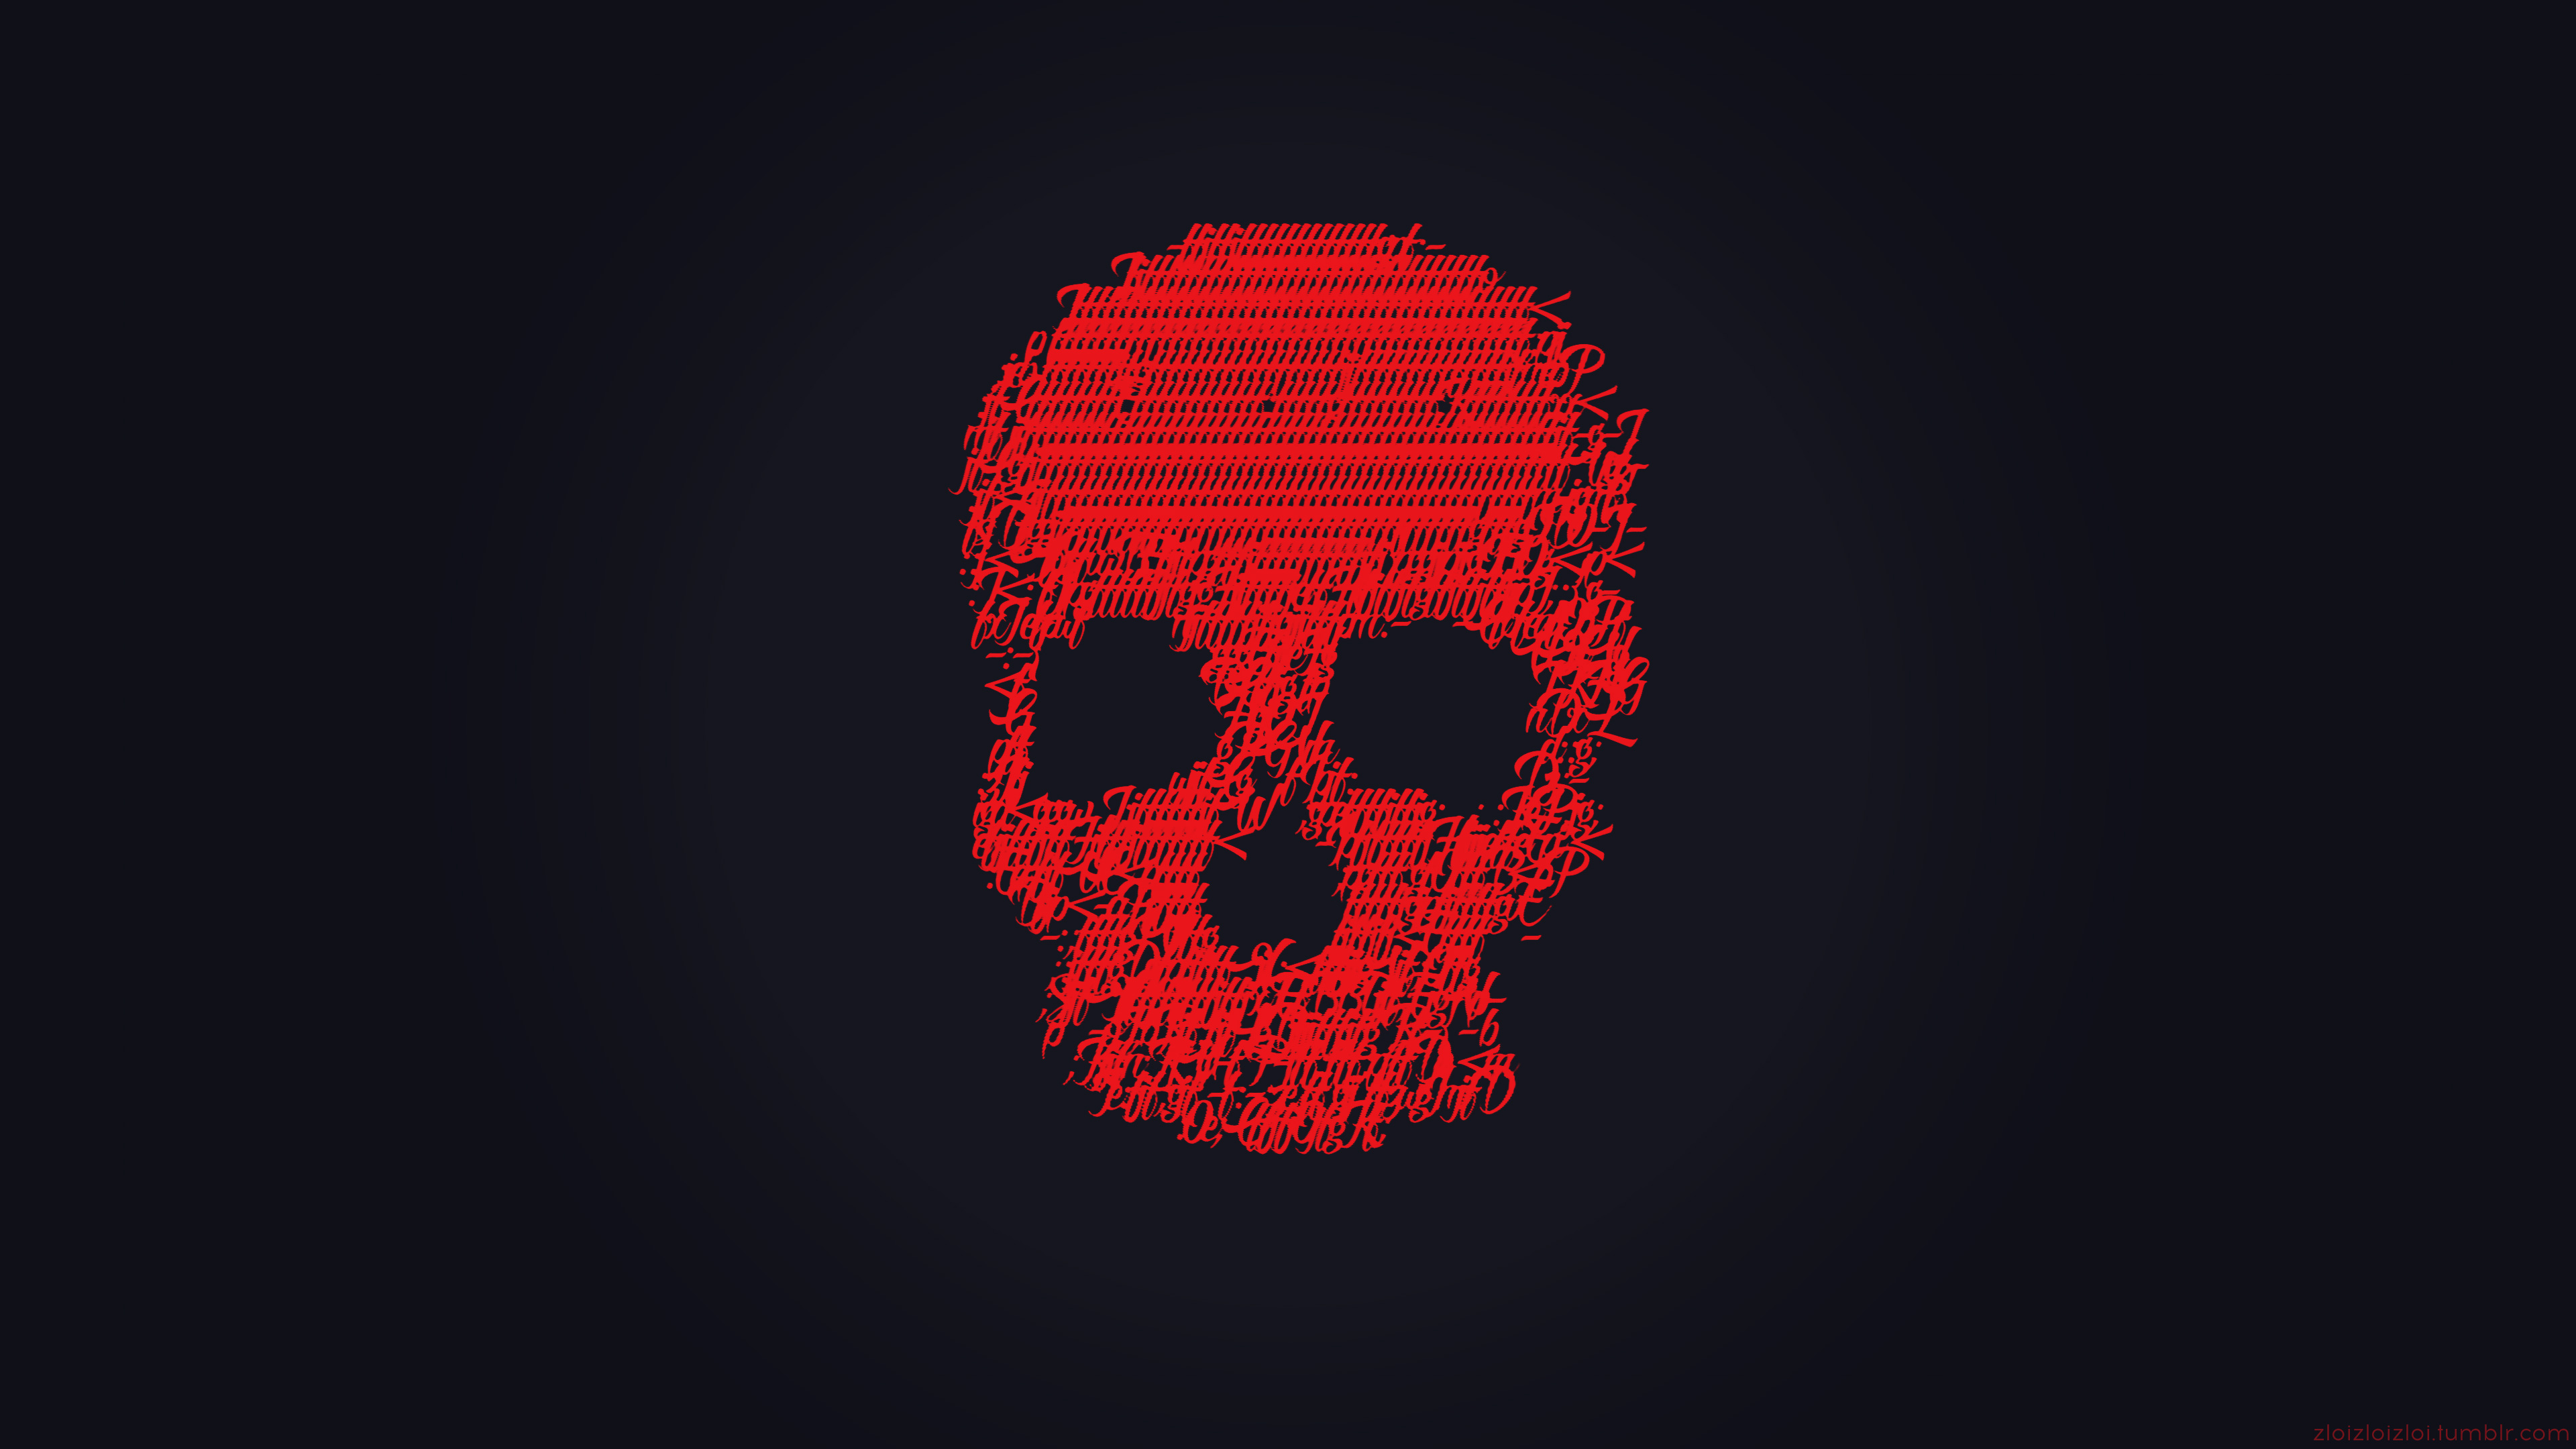 Red Skull 4k, HD Artist, 4k Wallpapers, Images, Backgrounds, Photos and